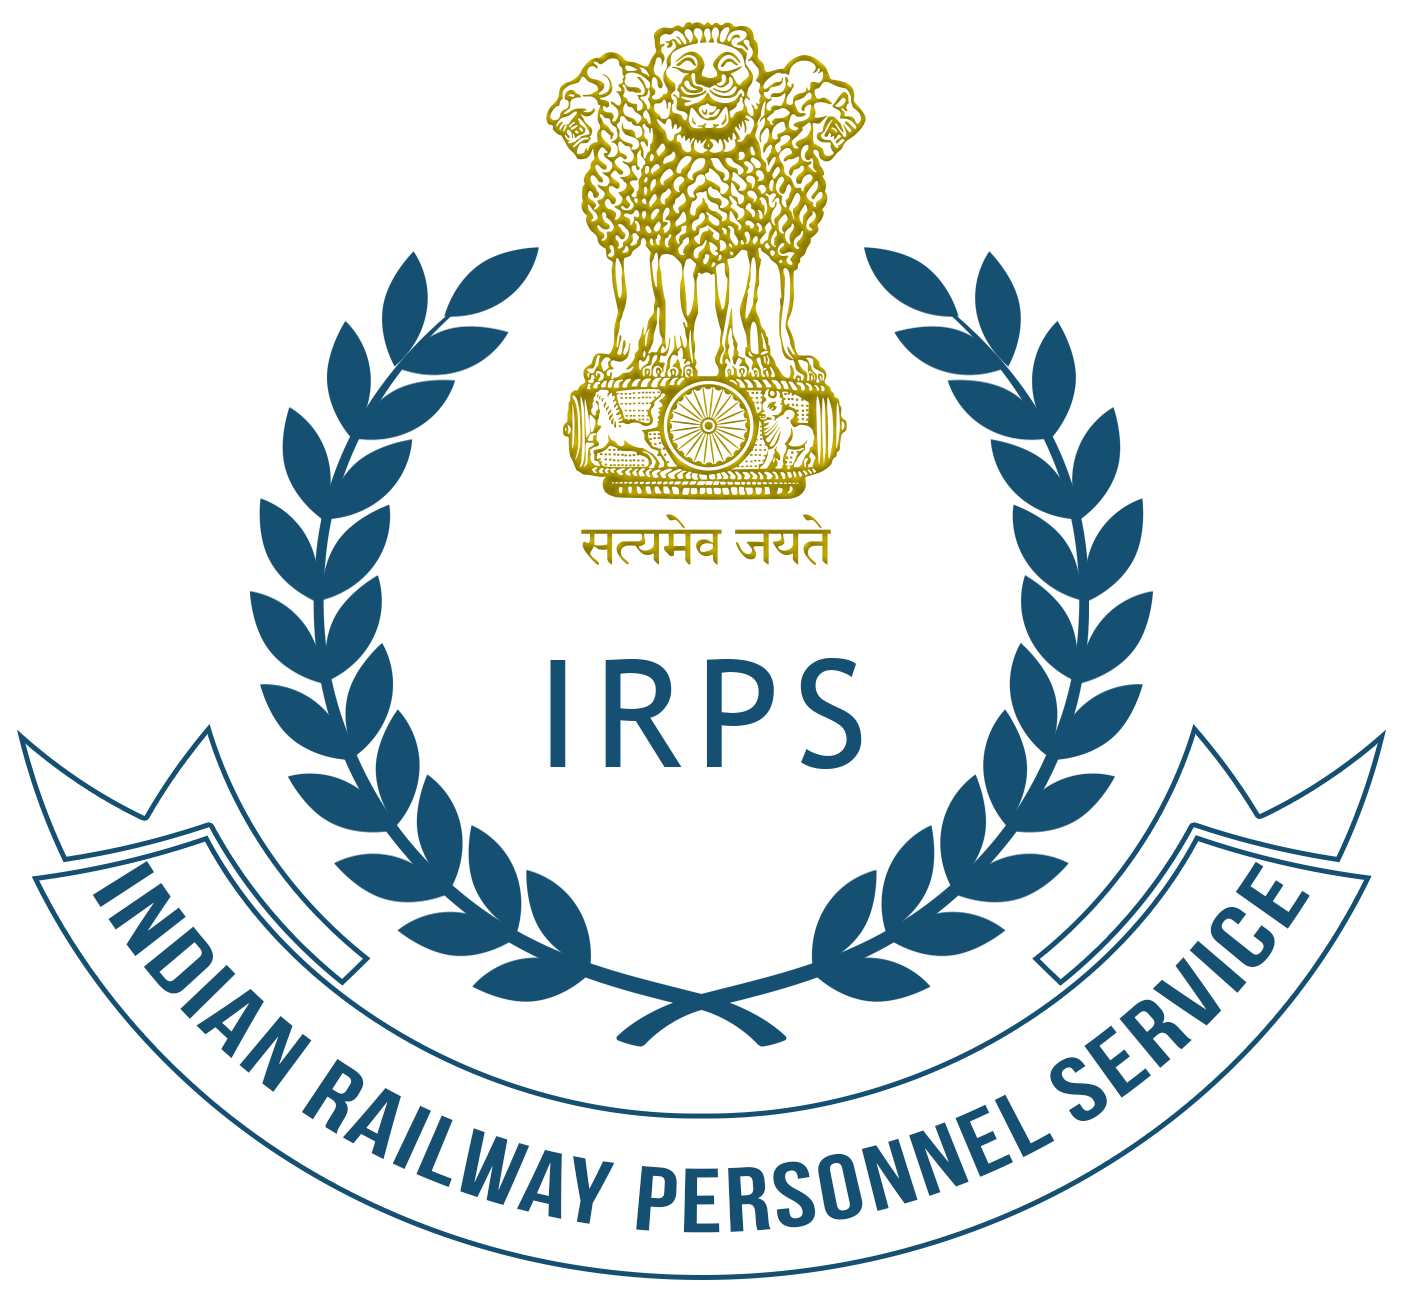 Indian Railway Personnel Service (IRPS)